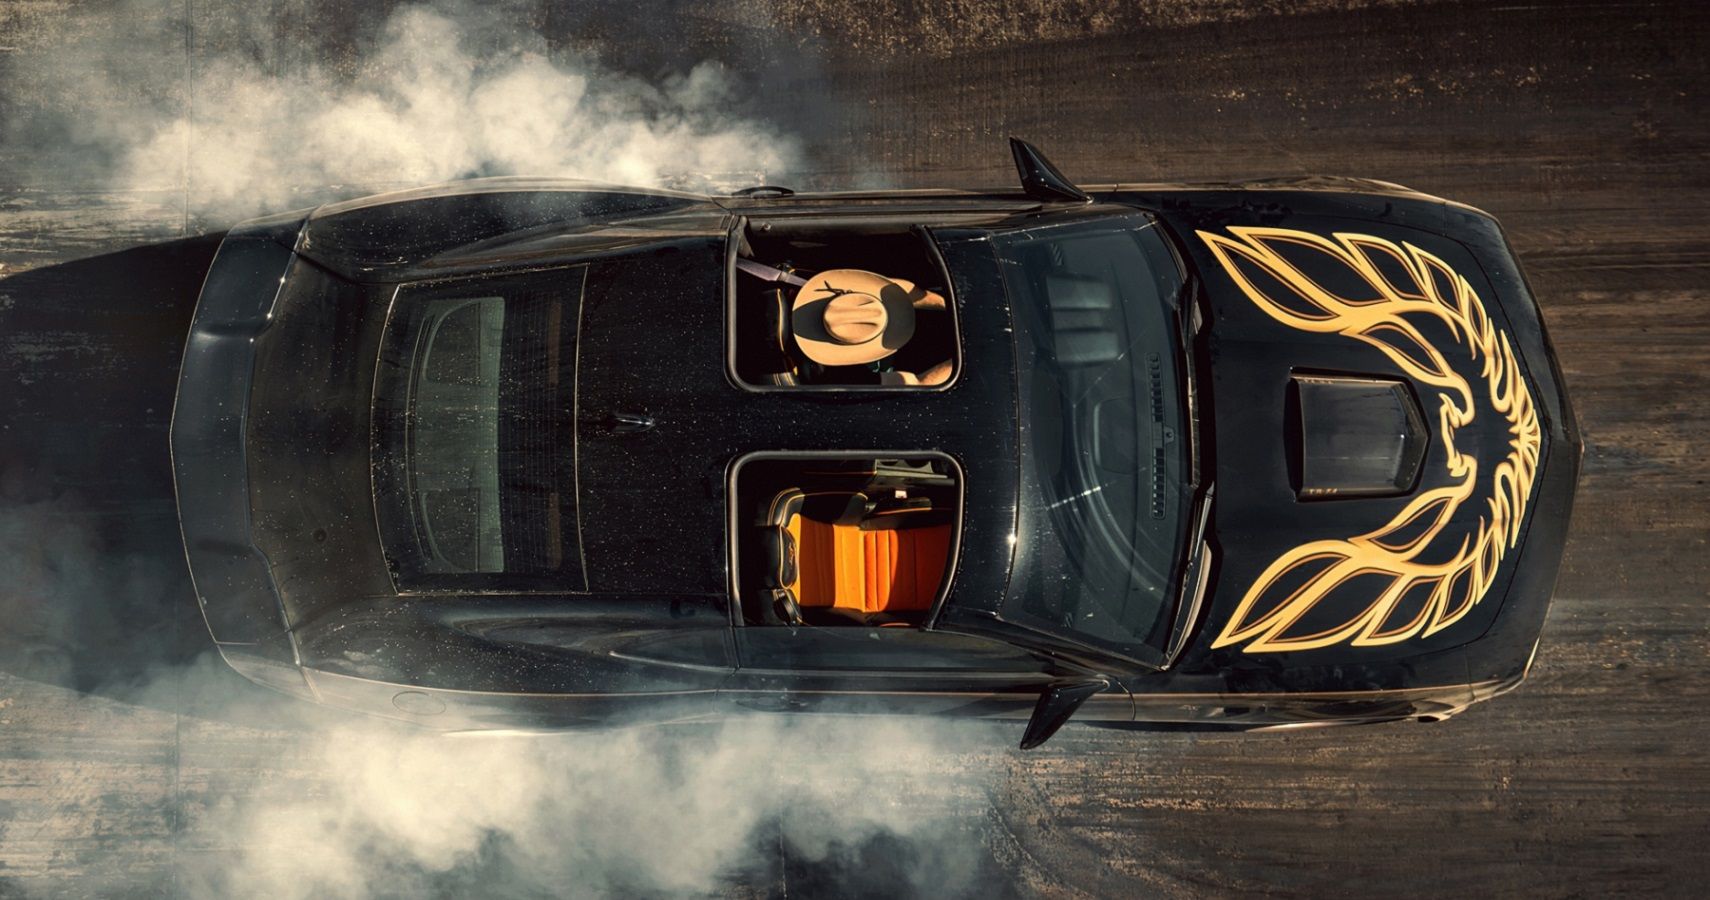 Check Out Trans Am Depot's Modern Take On The 1977 Smoky And The Bandit Muscle Car